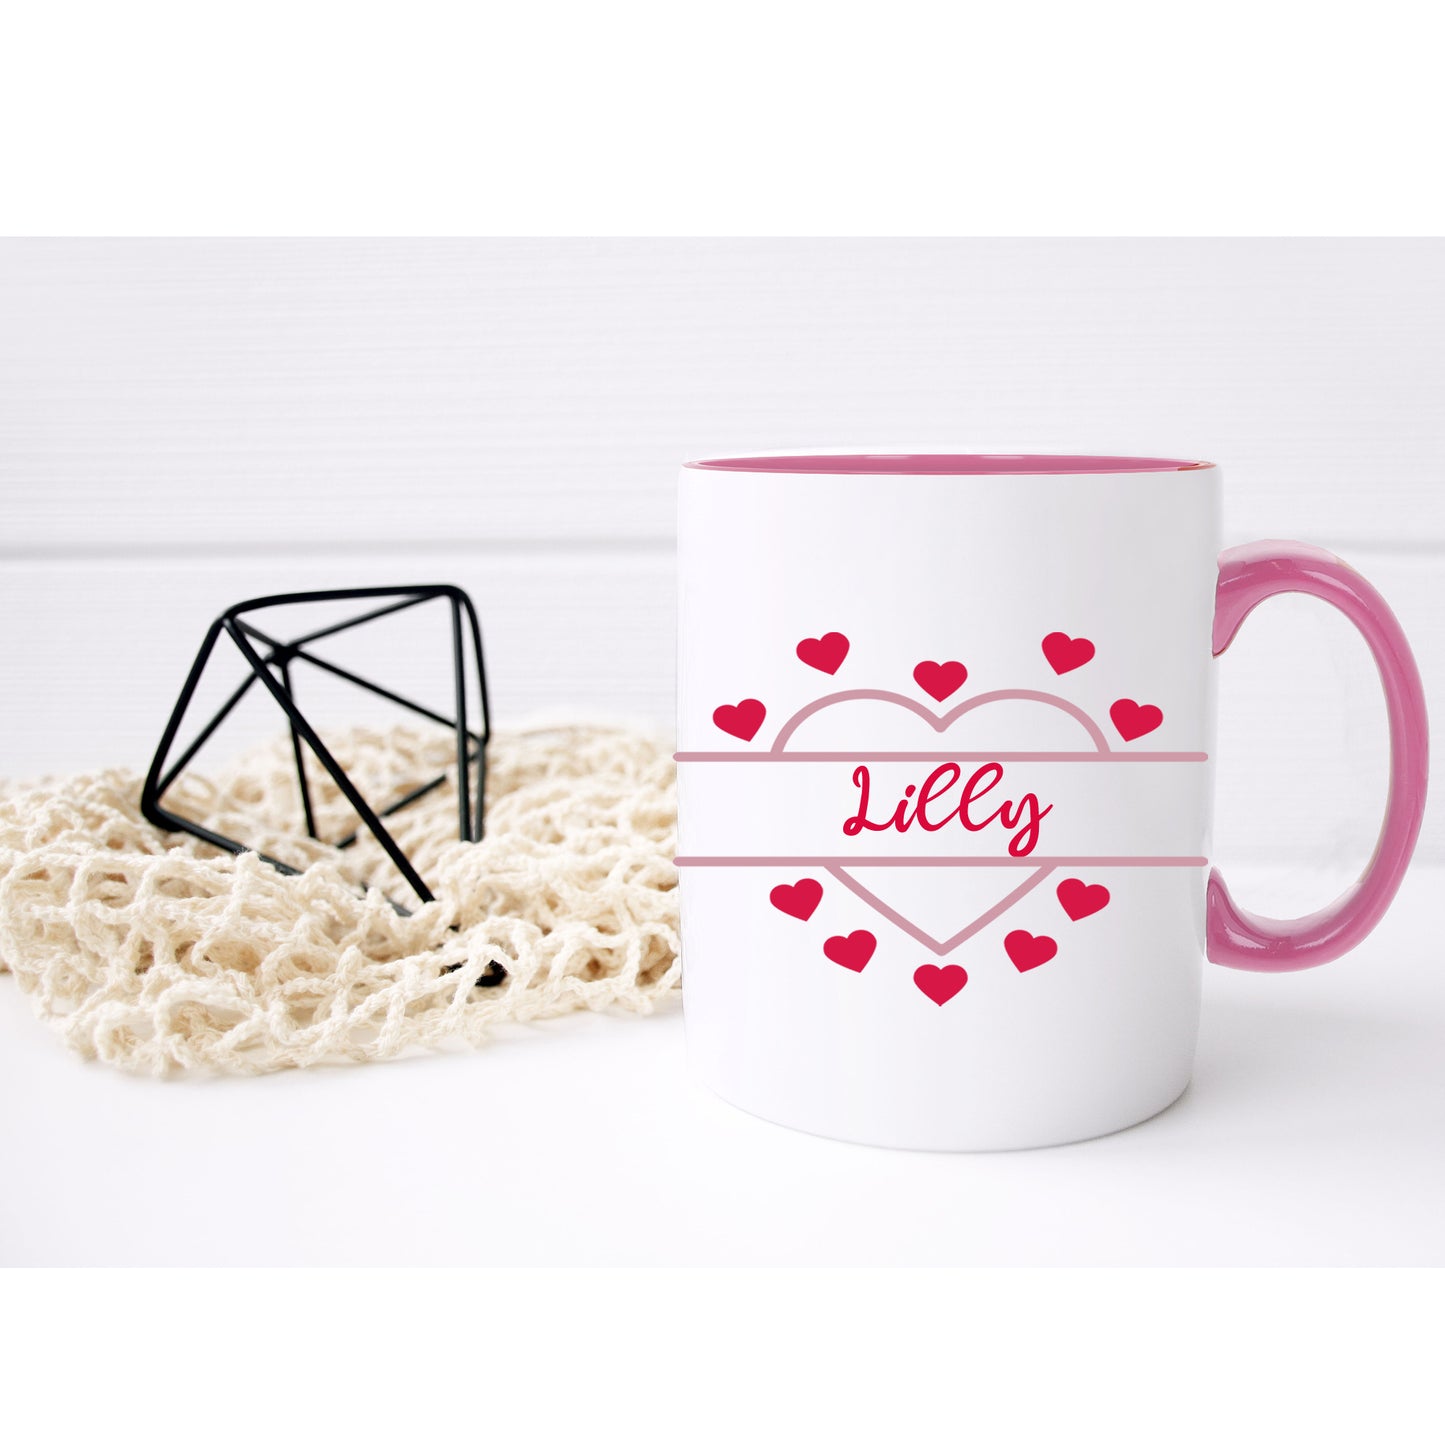 Personalised Pink Heart Design Mug and Coaster with Treats  - Always Looking Good -   